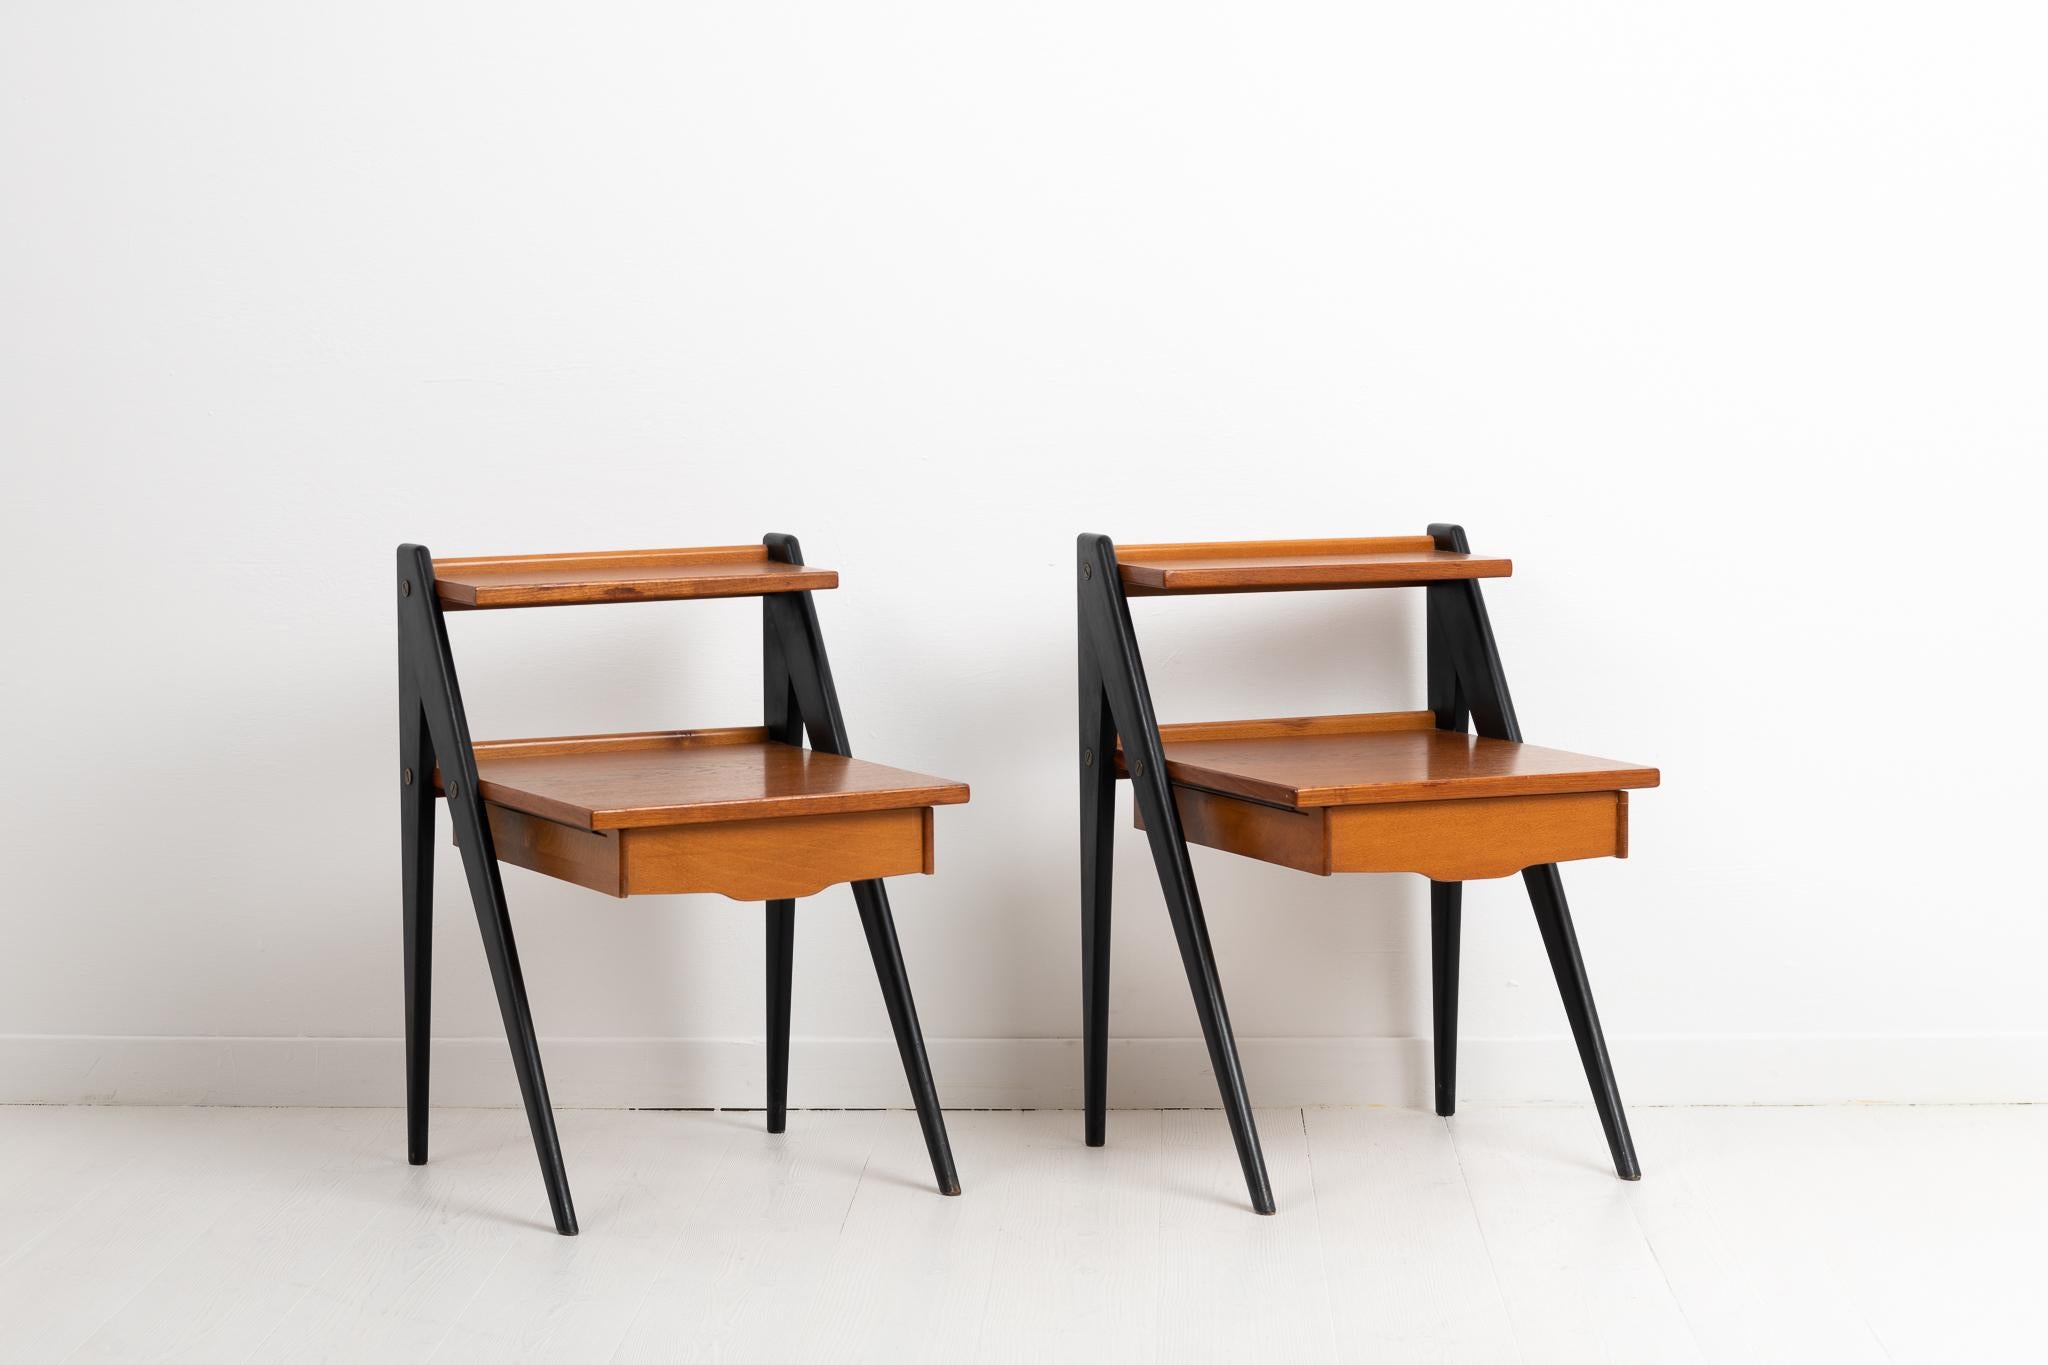 Scandinavian modern nightstands in teak with blackened legs designed by Yngve Ekström. The nightstands are from Sweden and made during the 1960s. Good vintage condition consistent with age and use. They have smaller traces of wear.